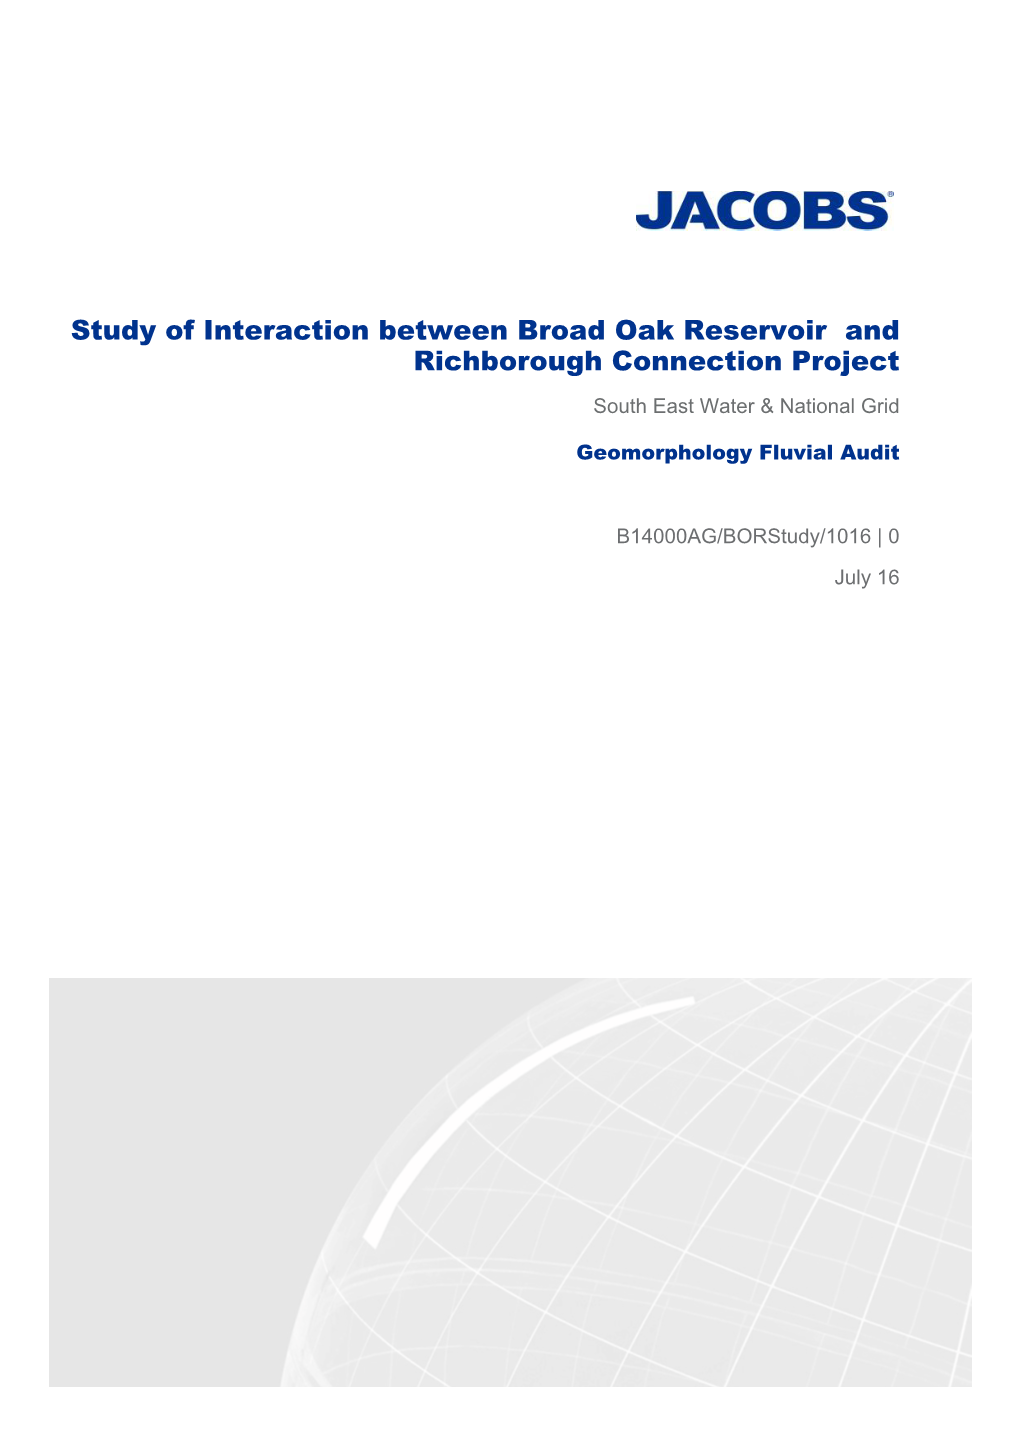 Study of Interaction Between Broad Oak Reservoir and Richborough Connection Project South East Water & National Grid